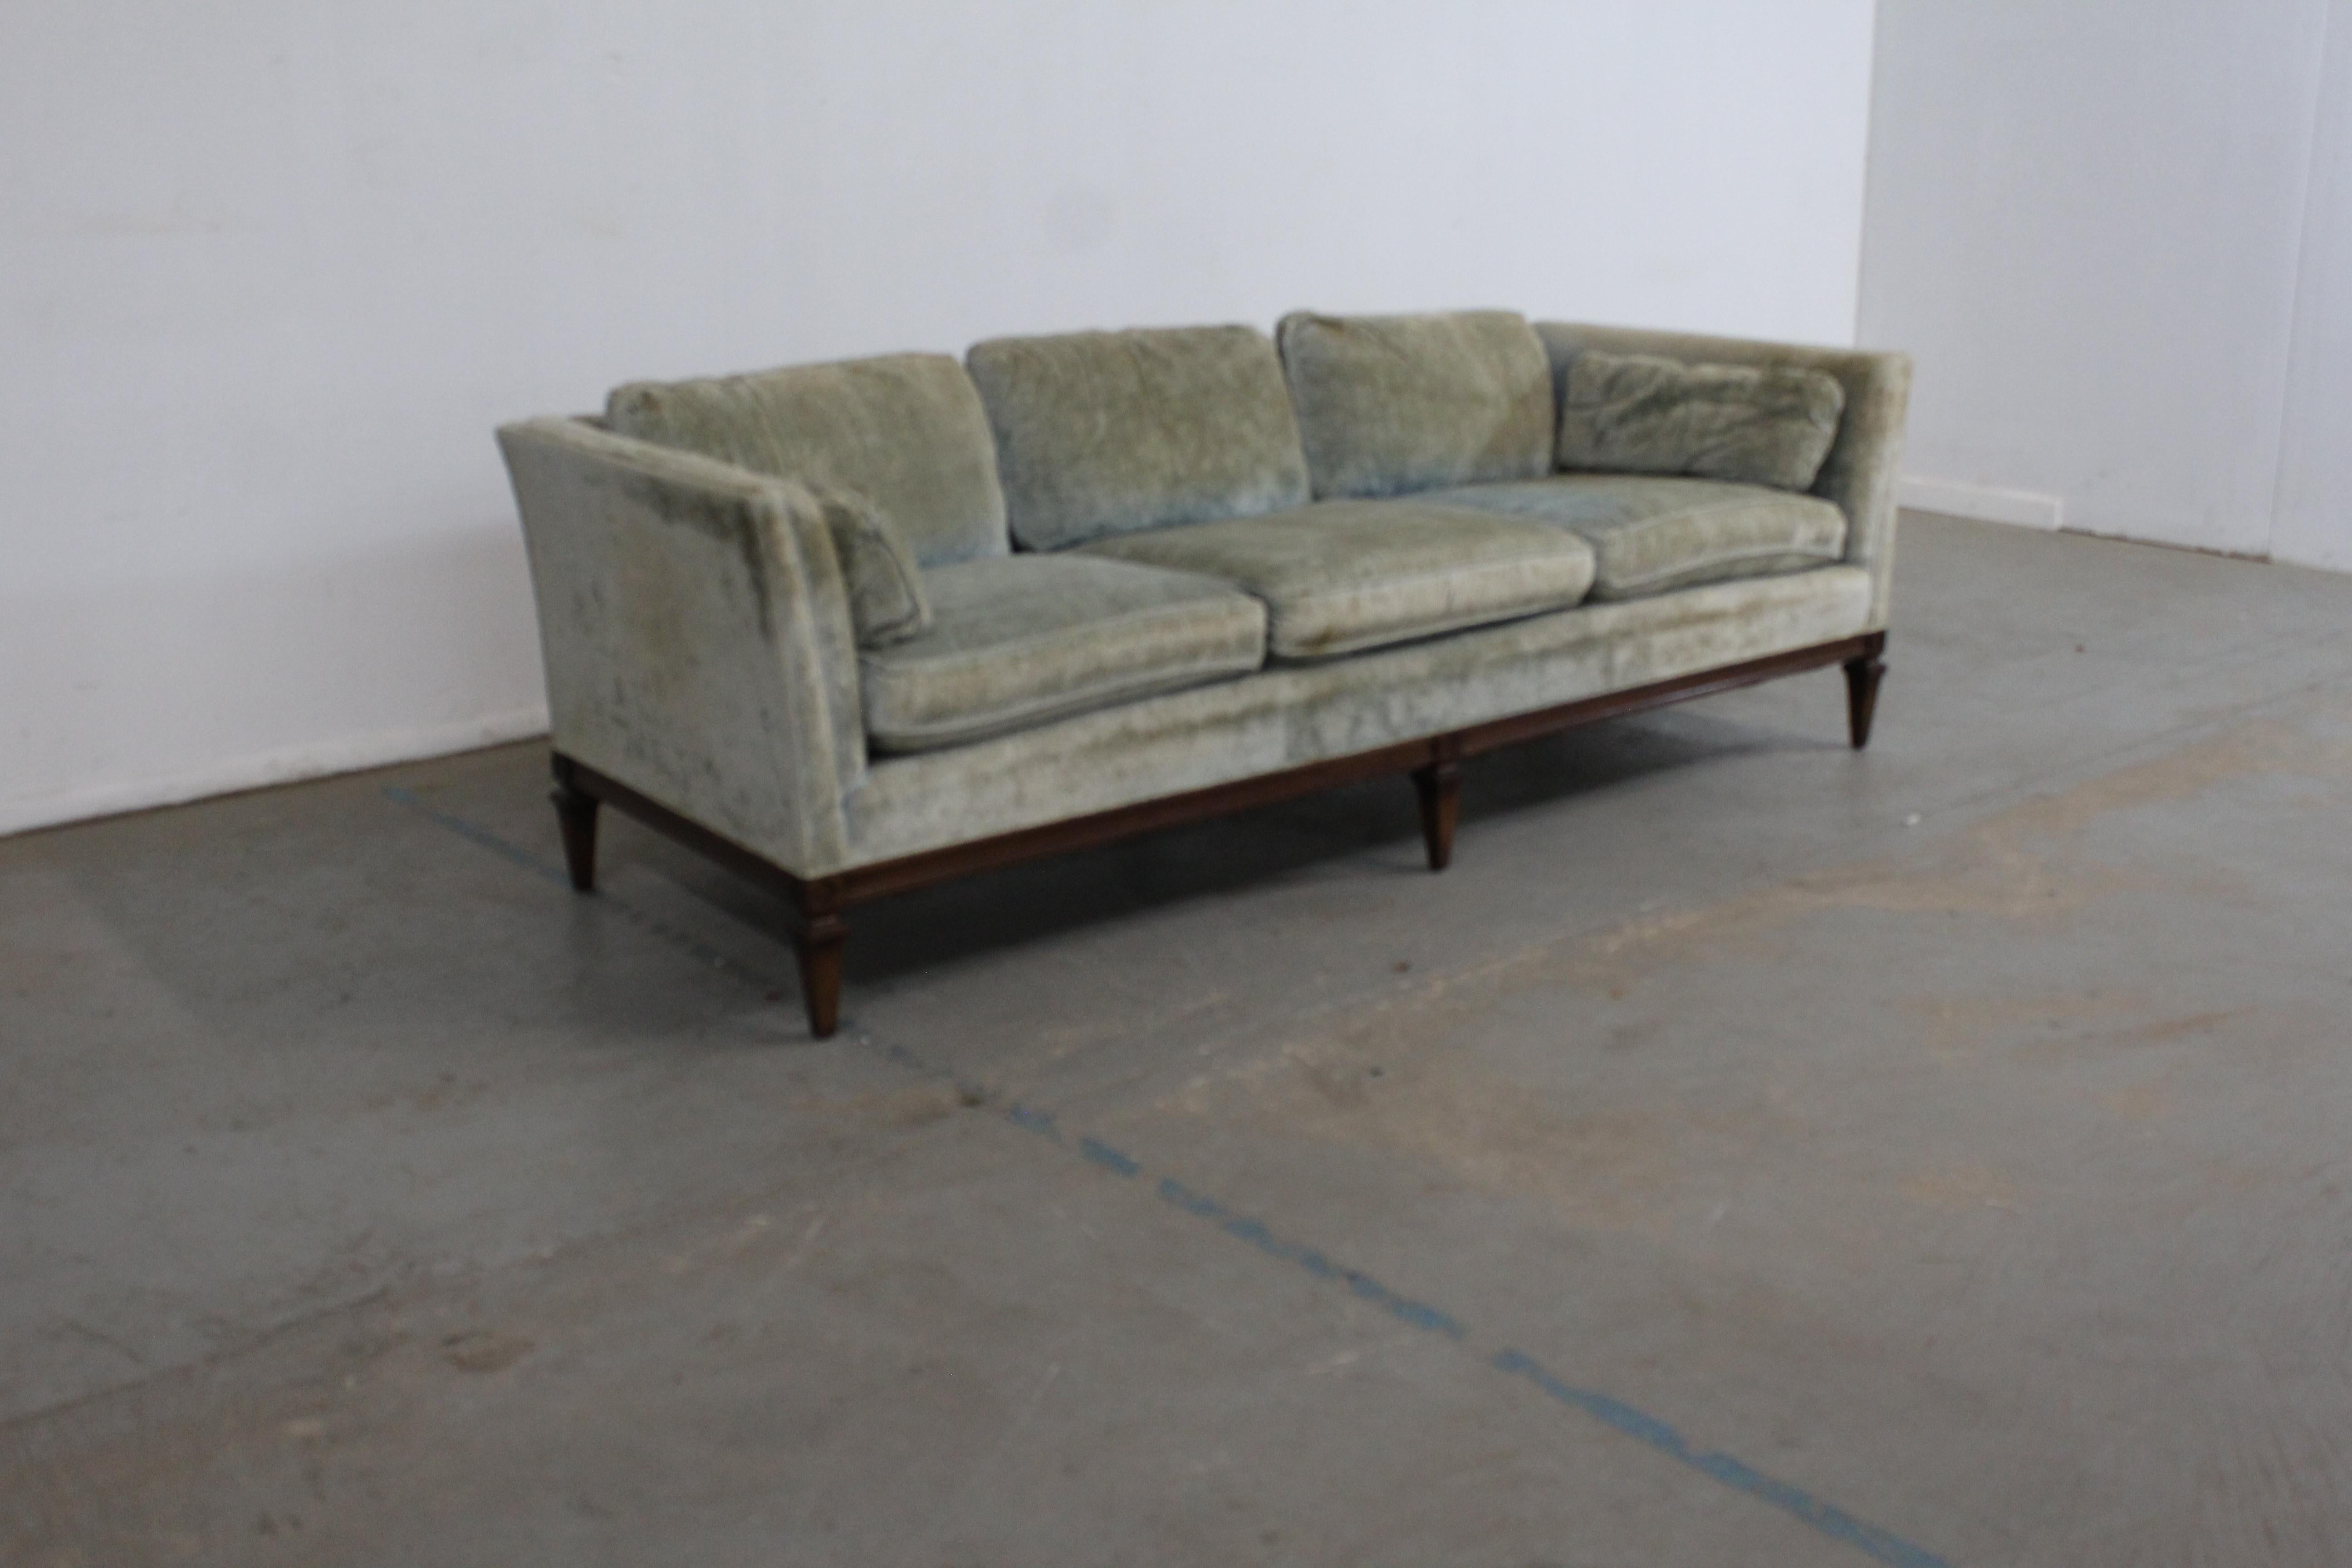 Mid-Century Modern Milo Baughman style sofa

Offered is a Mid-Century Modern sofa with tapered legs. Has 3 removable seat cushions and 3 back cushions. It is in great structurally sound condition considering its age with torn upholstery. This item